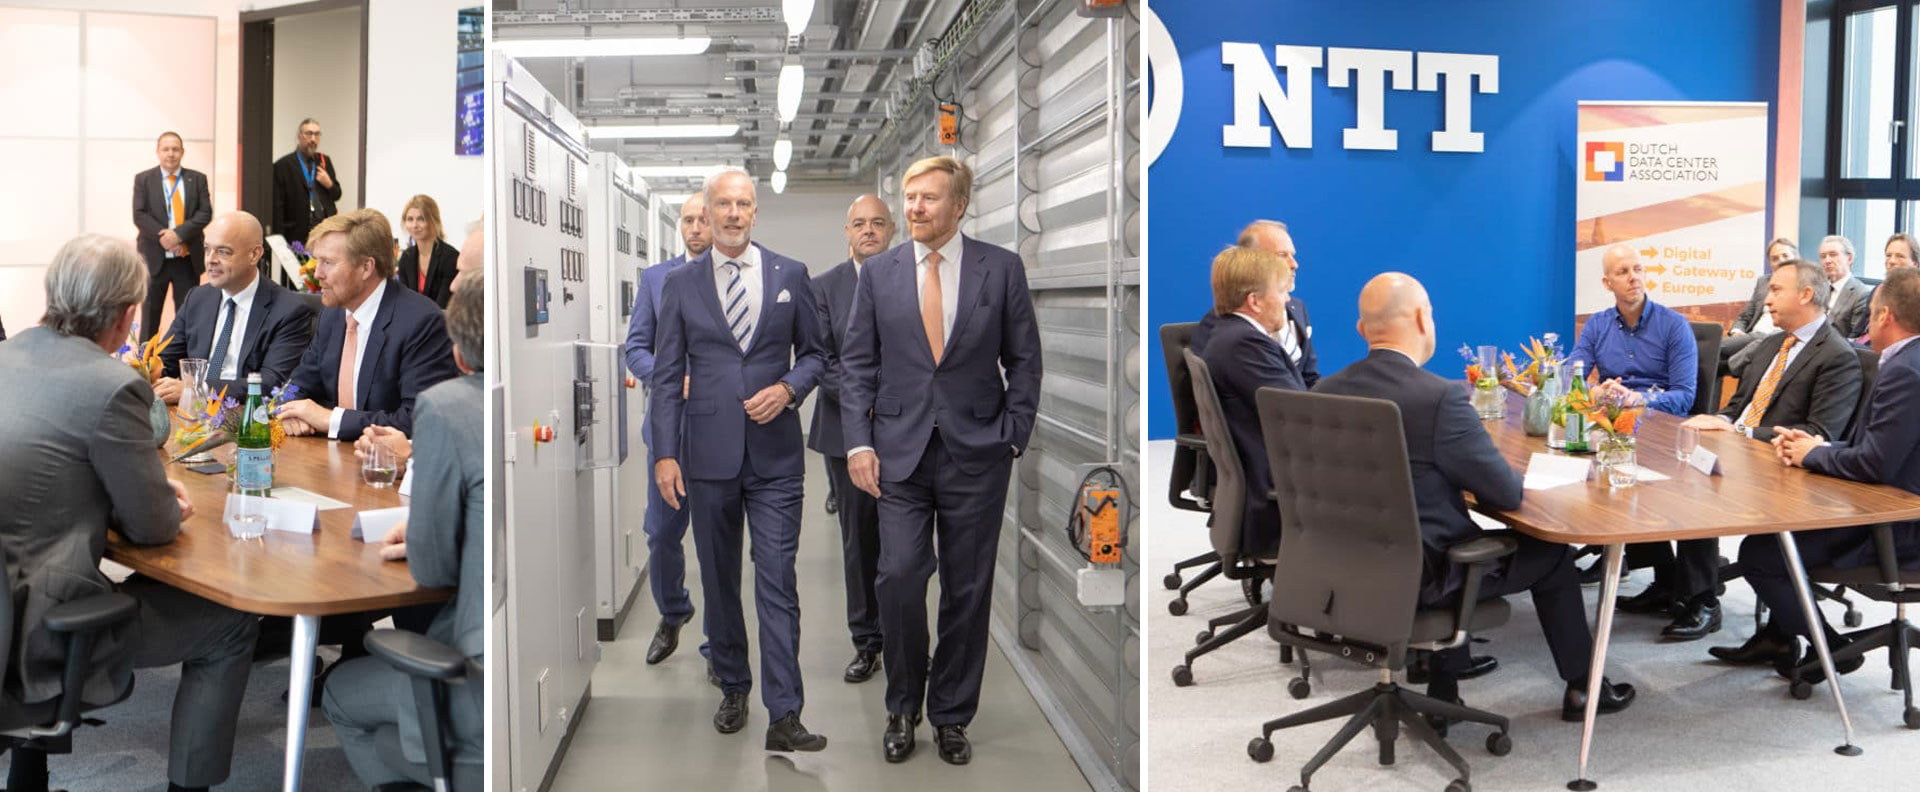 King Willem-Alexander Meets With Leaders of the Cloud Industry